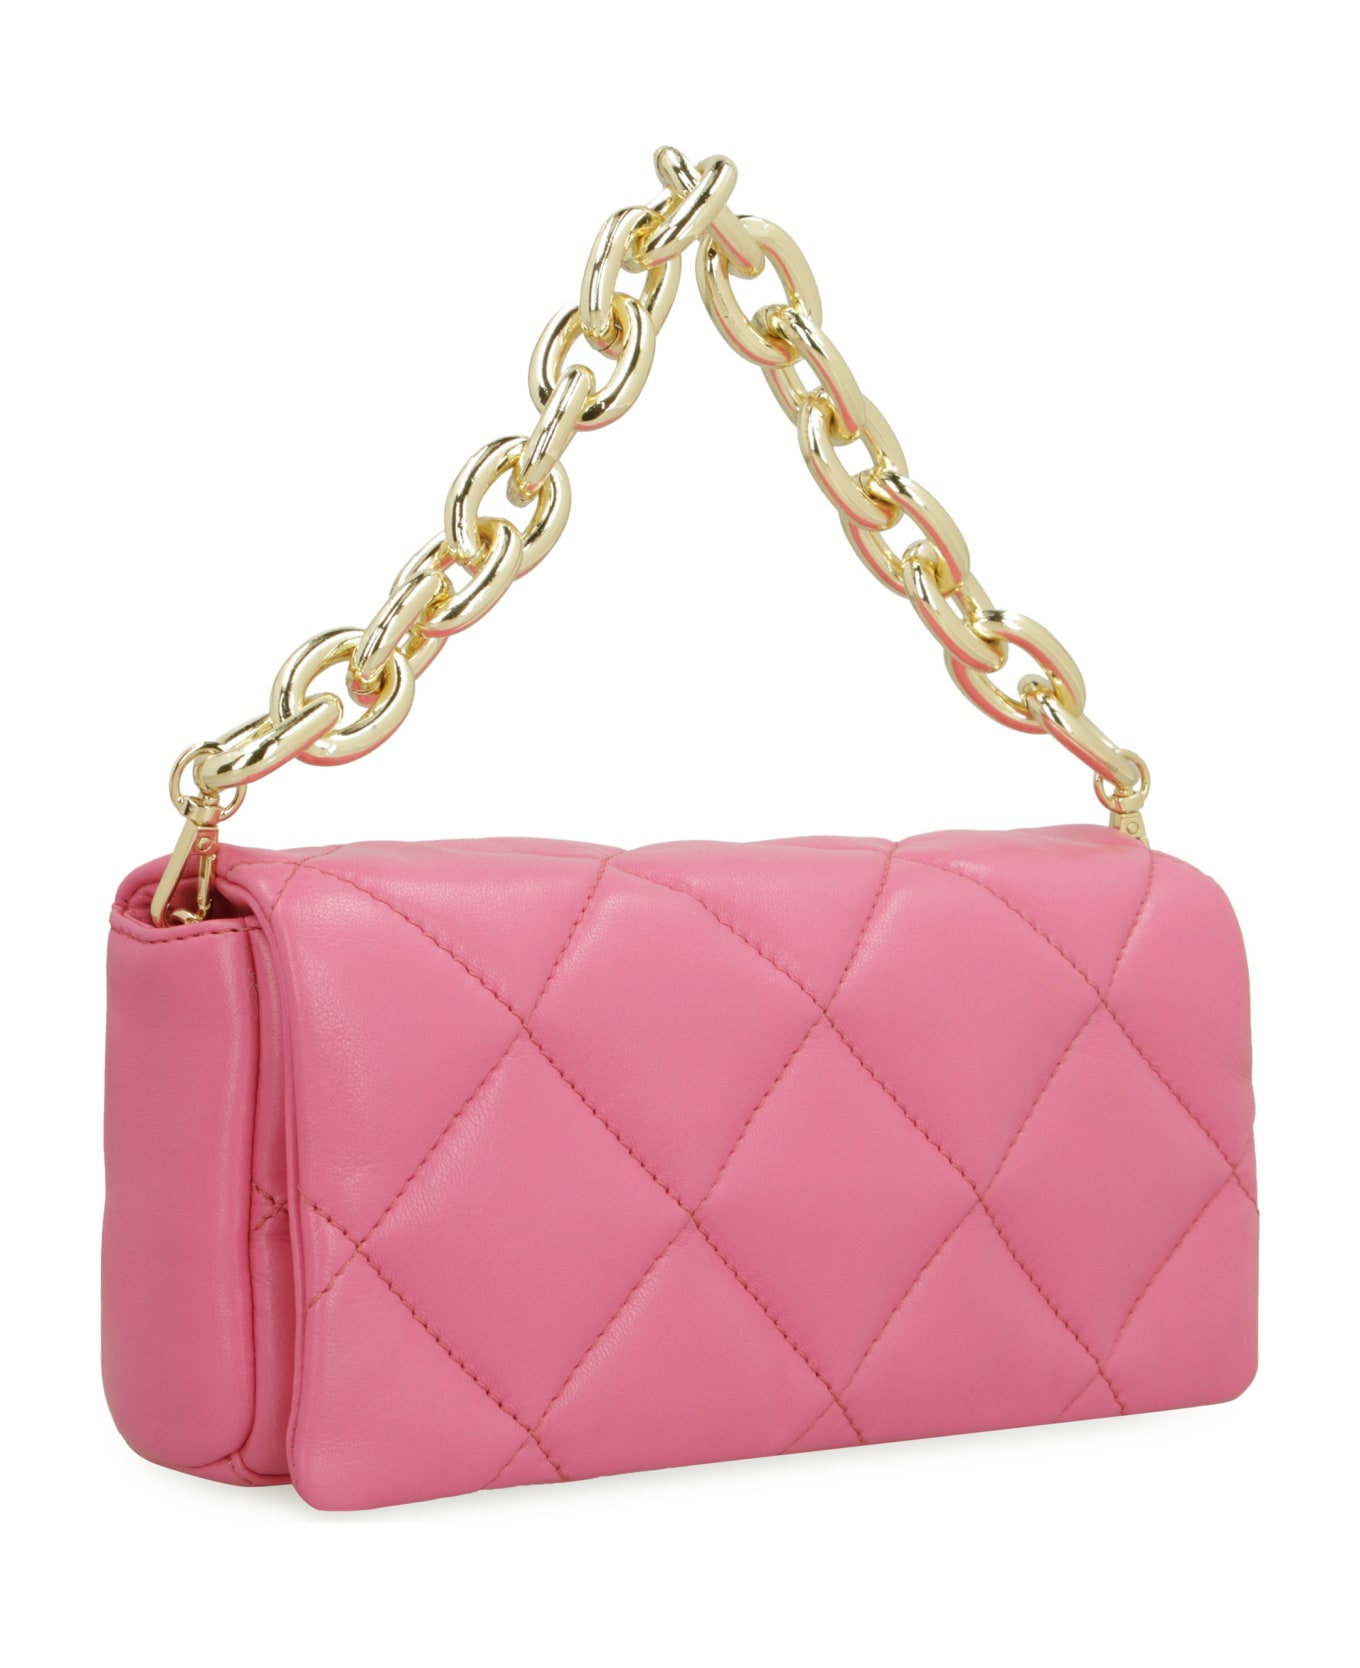 STAND STUDIO Hera Quilted Leather Bag - Fuchsia